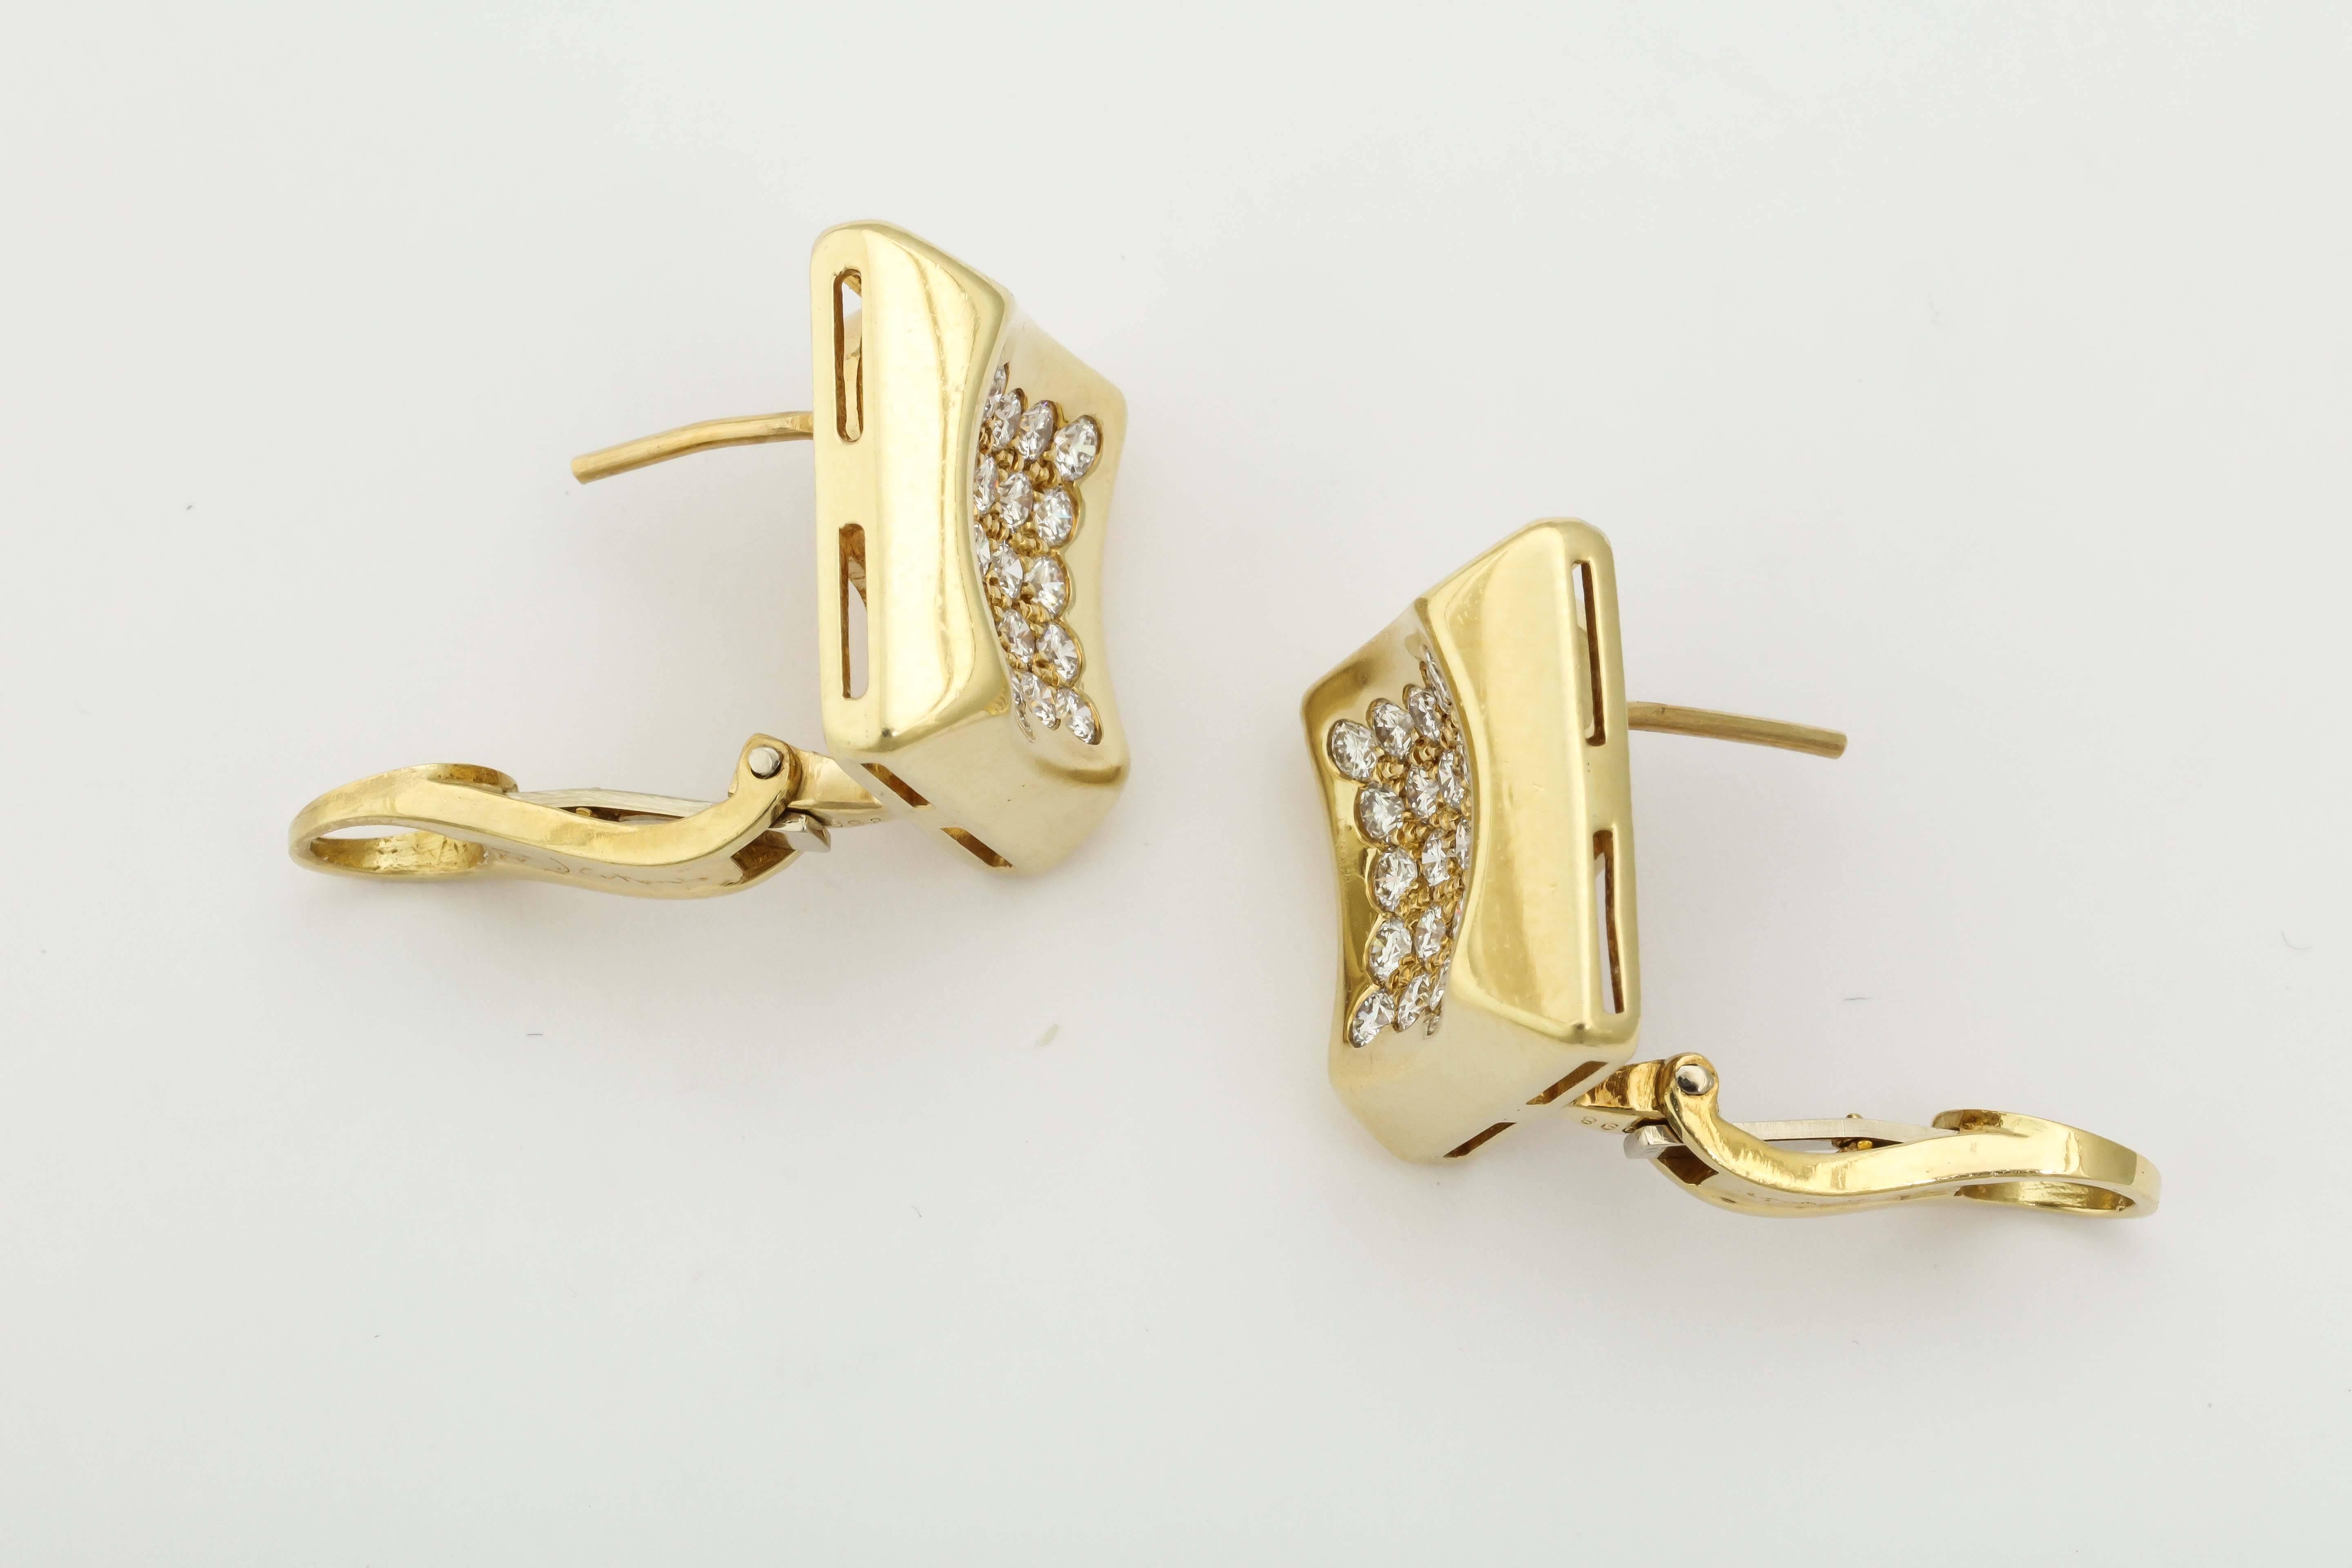 18kt Yellow Gold Concaved Square Earclips With Retractable Posts For Pierced And Non-Pierced Ears Designed With 2 Carats Of Very High Quality Full cut Diamonds,Signed Robert Lee Morris Designed In the 1990's In The United States.